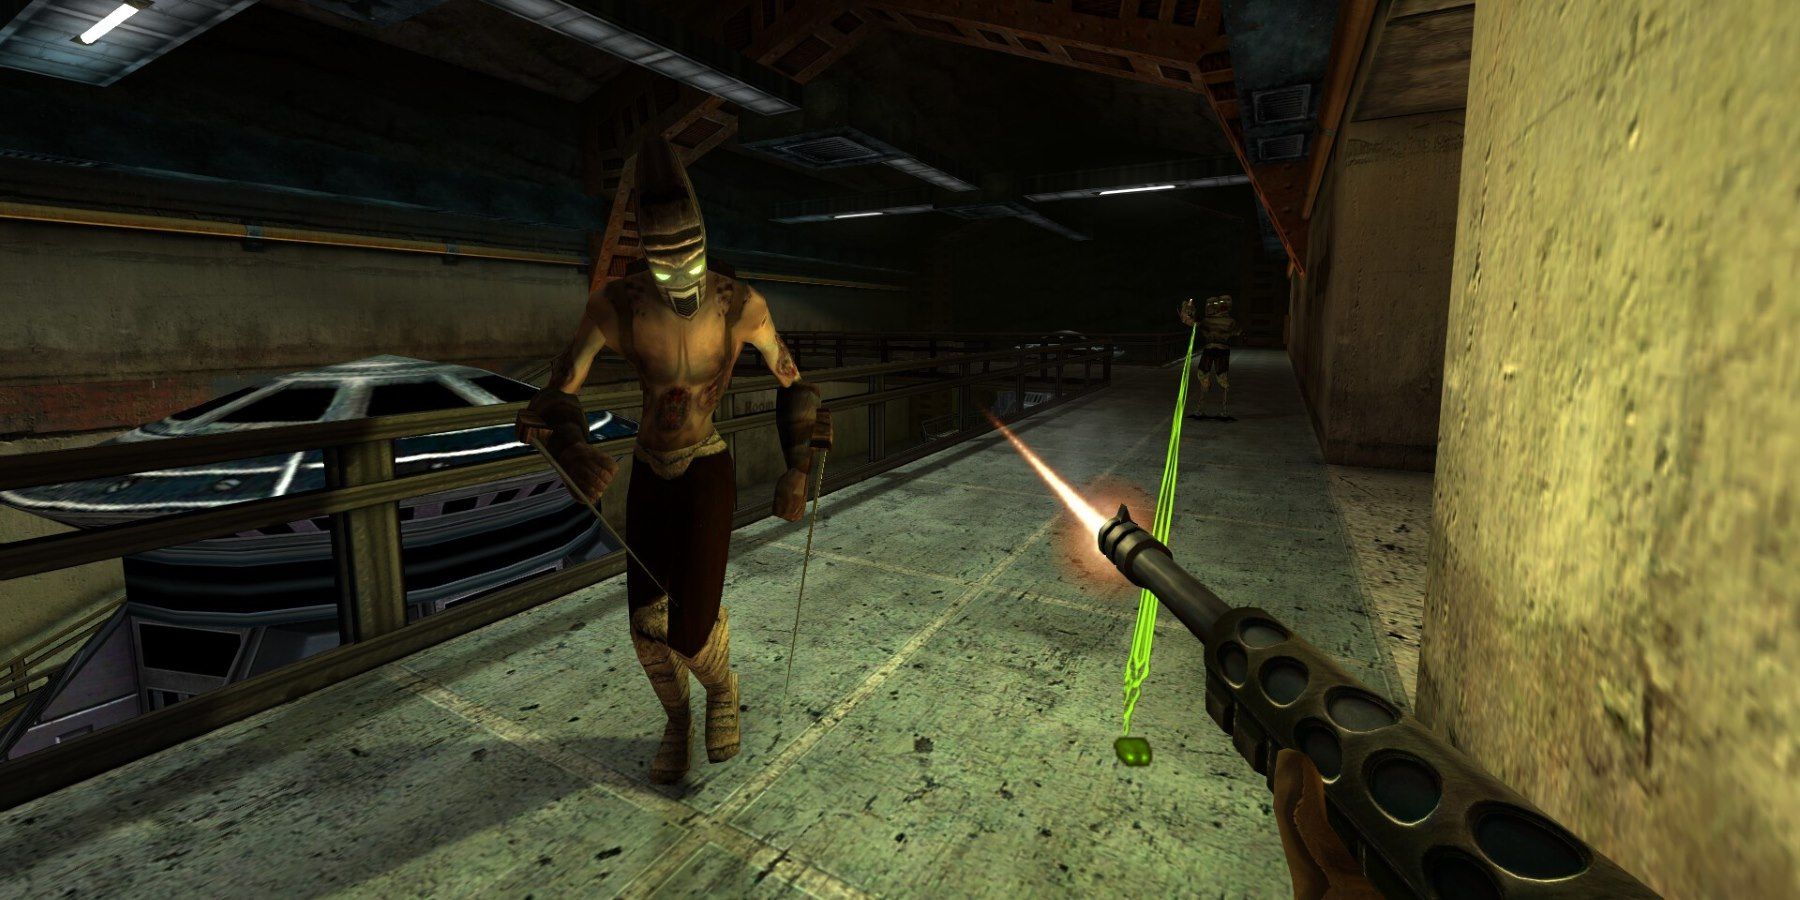 Turok 3 Remaster Accidentally Released Early in Some Areas